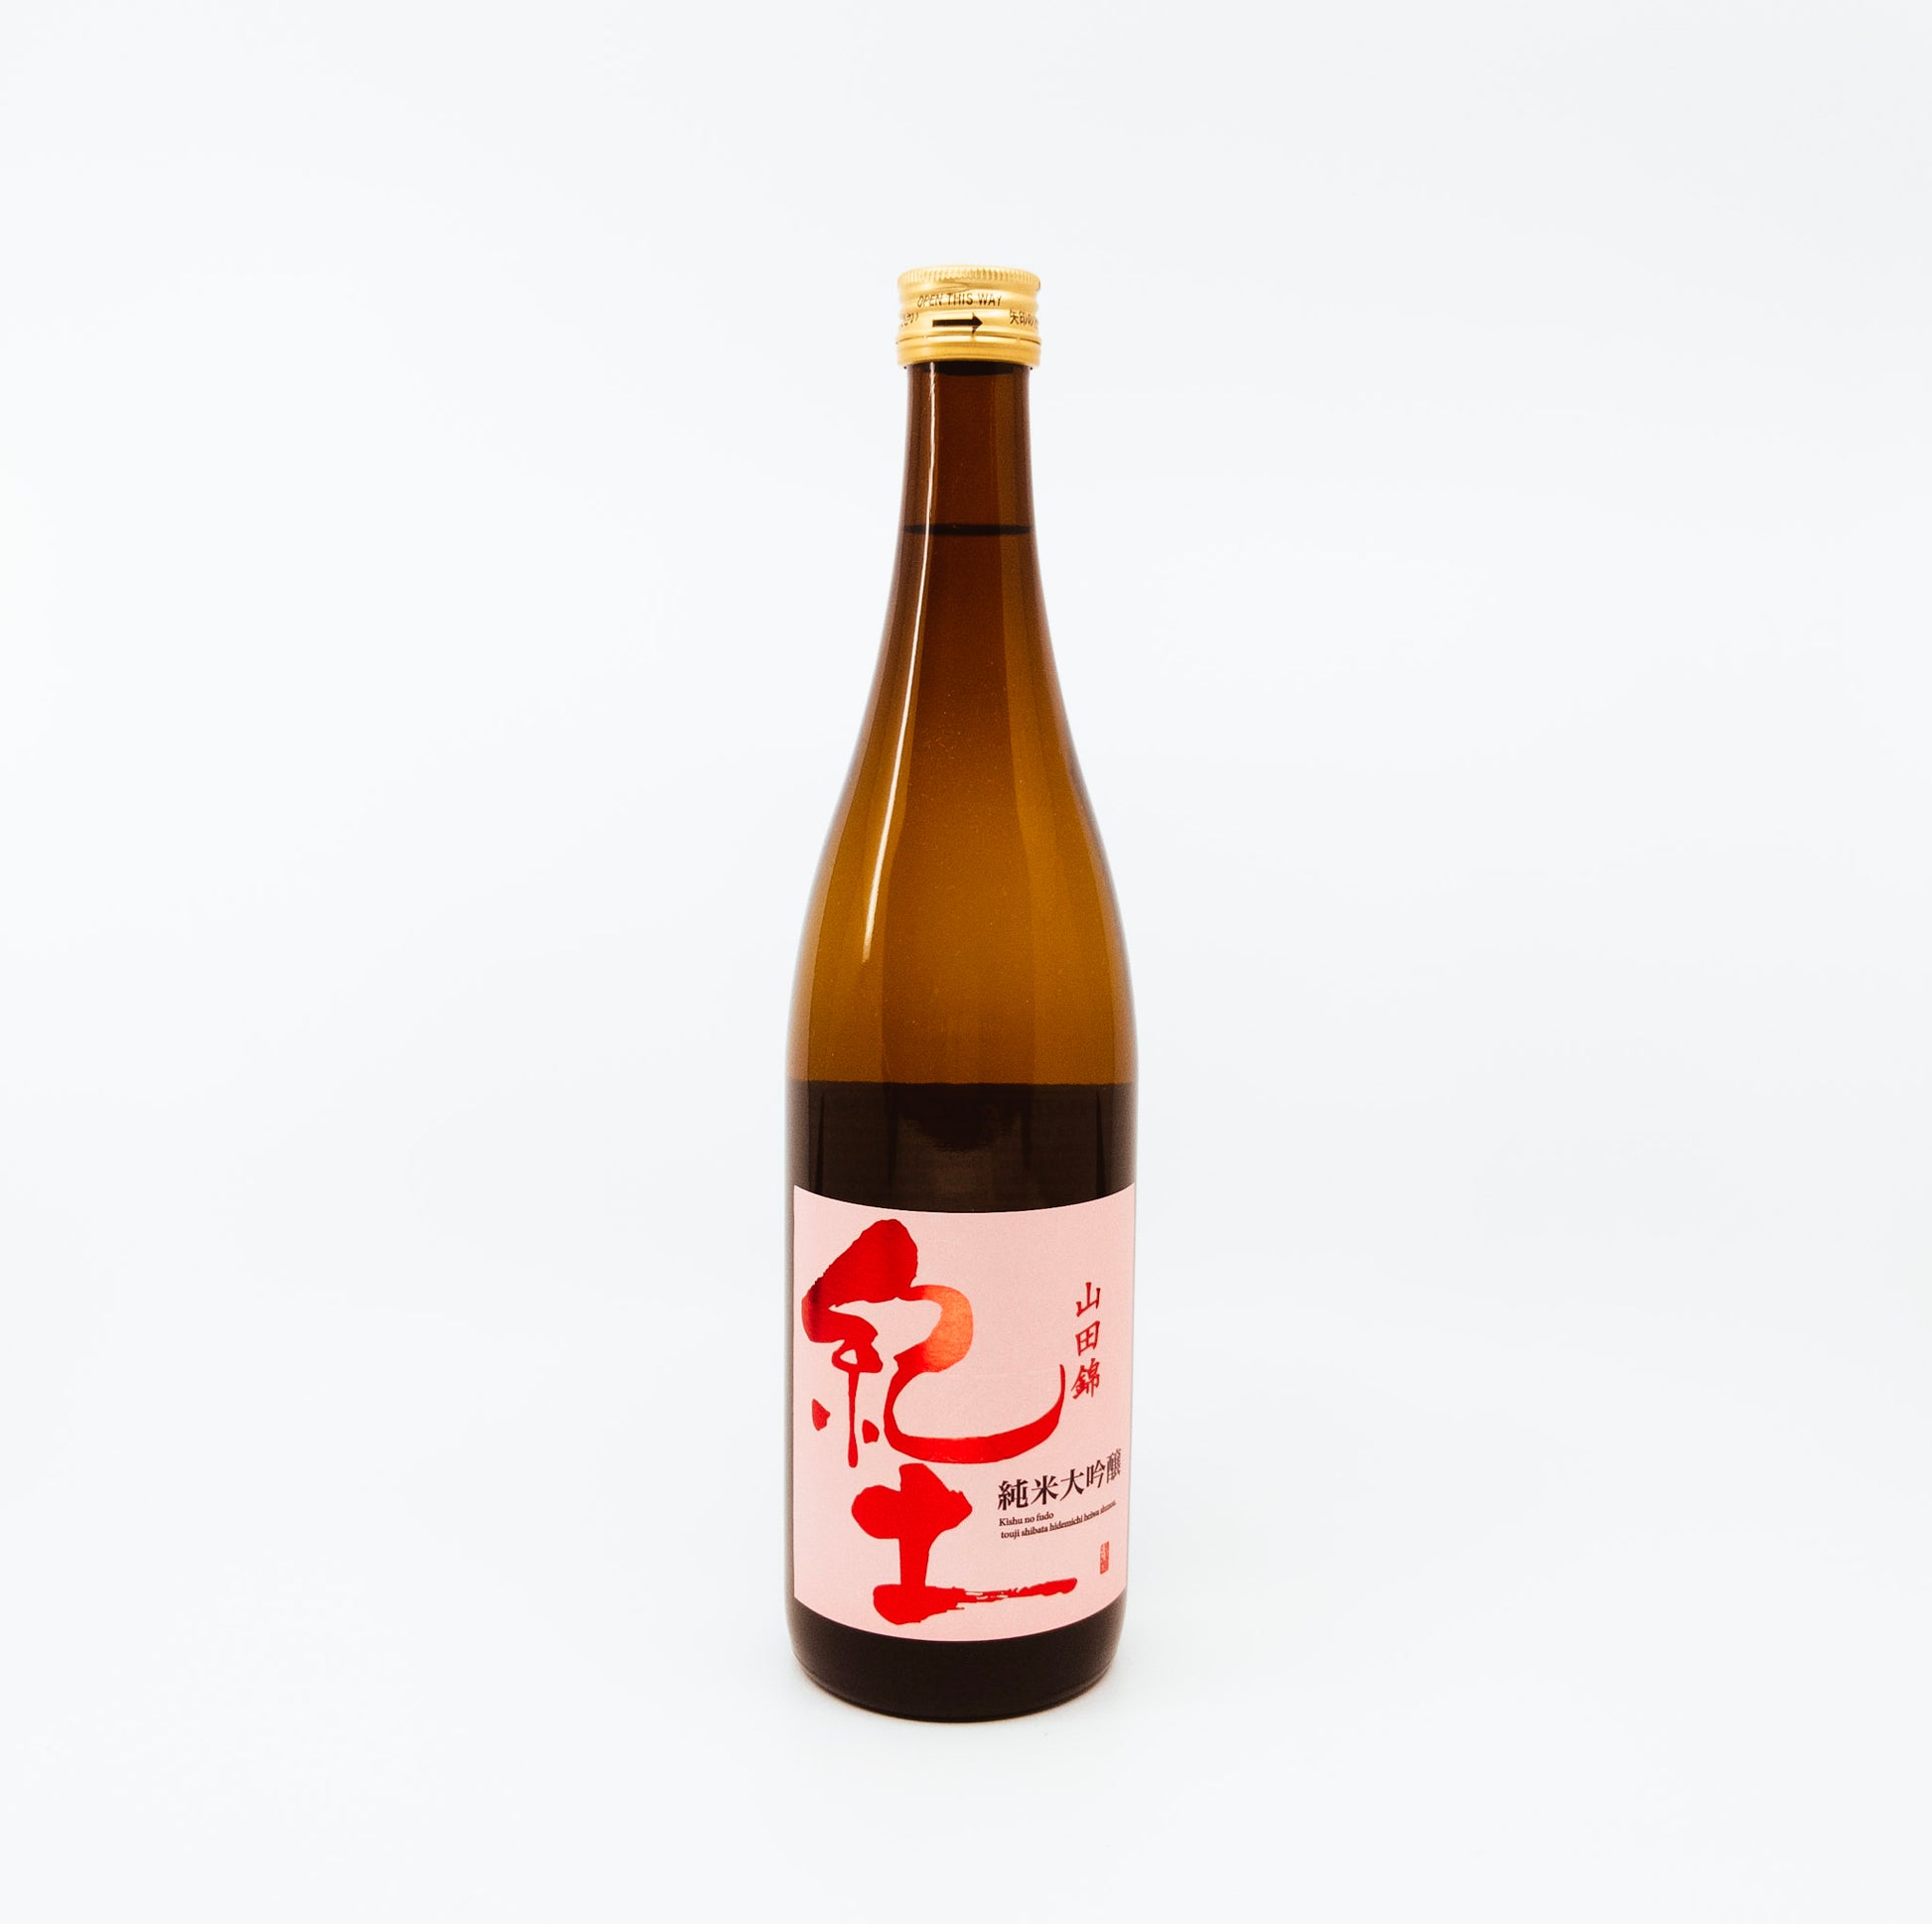 brown bottle with red writing on pink label